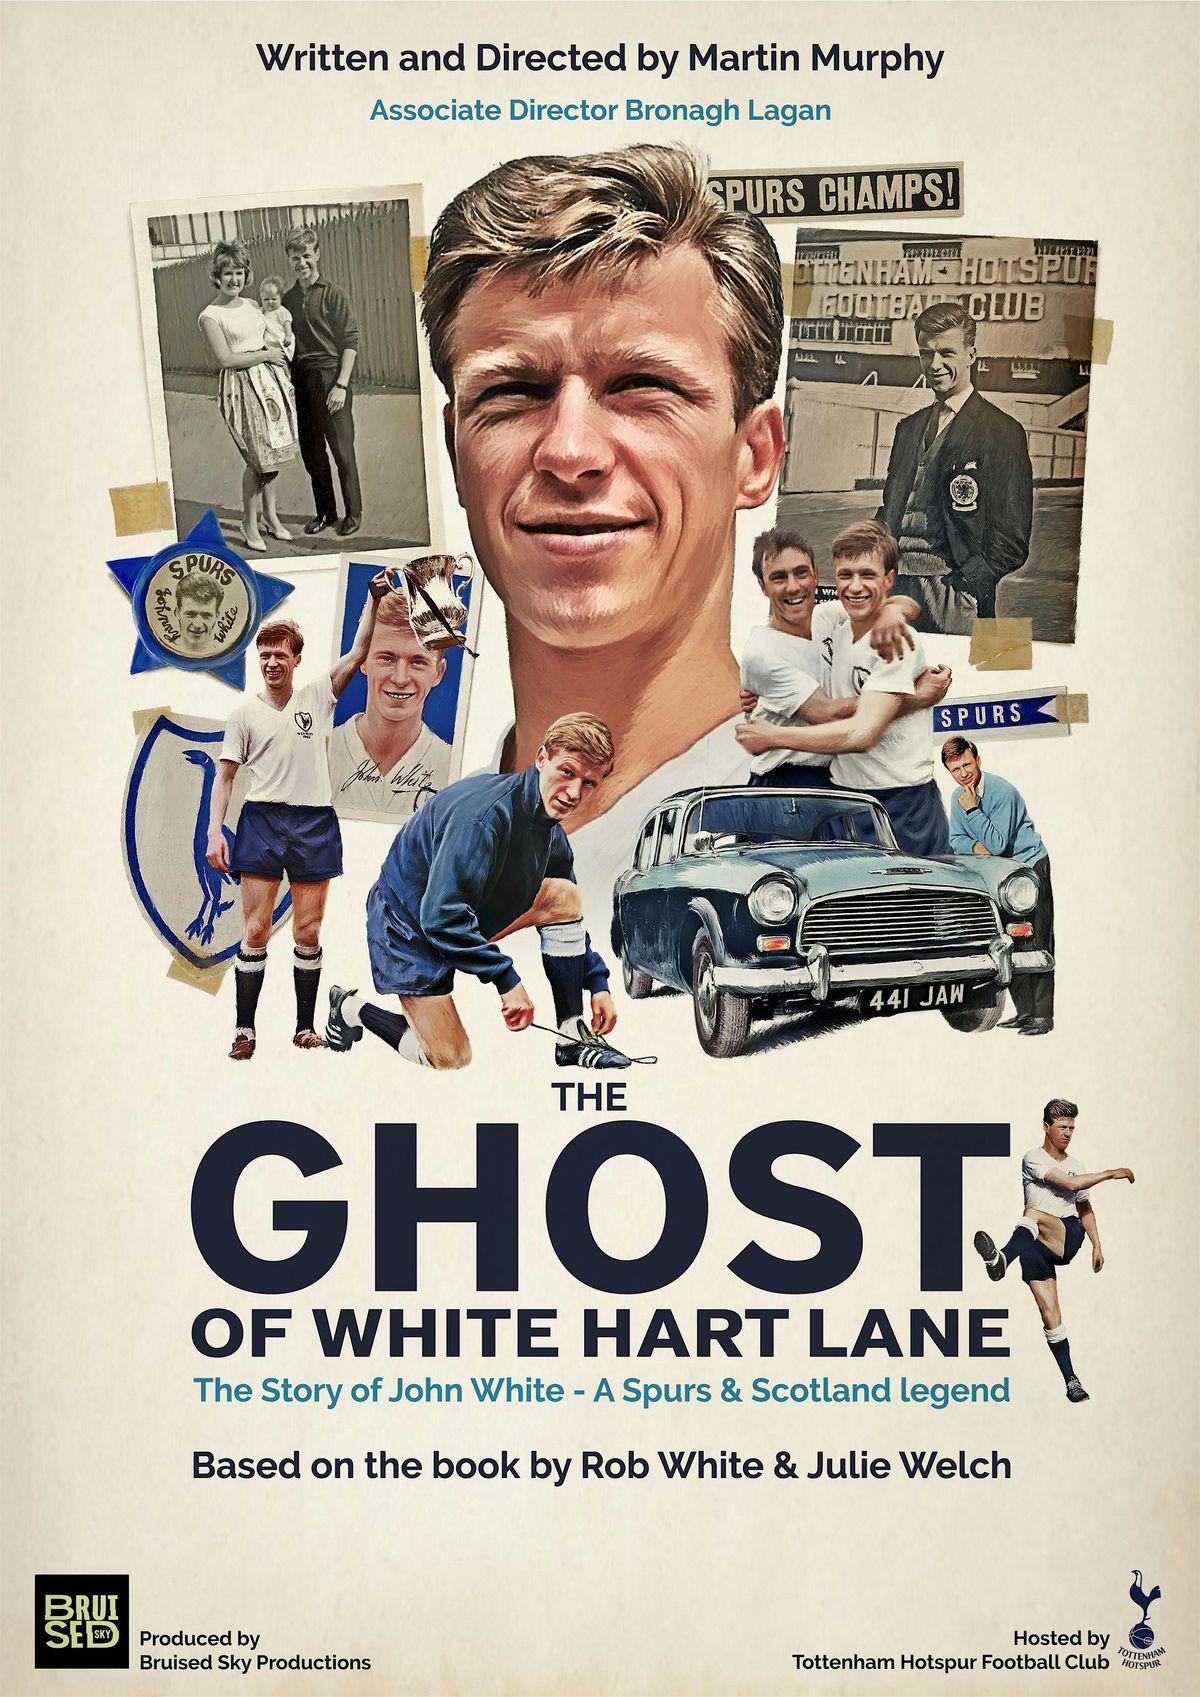 The Ghost of White Hart Lane by Martin Murphy